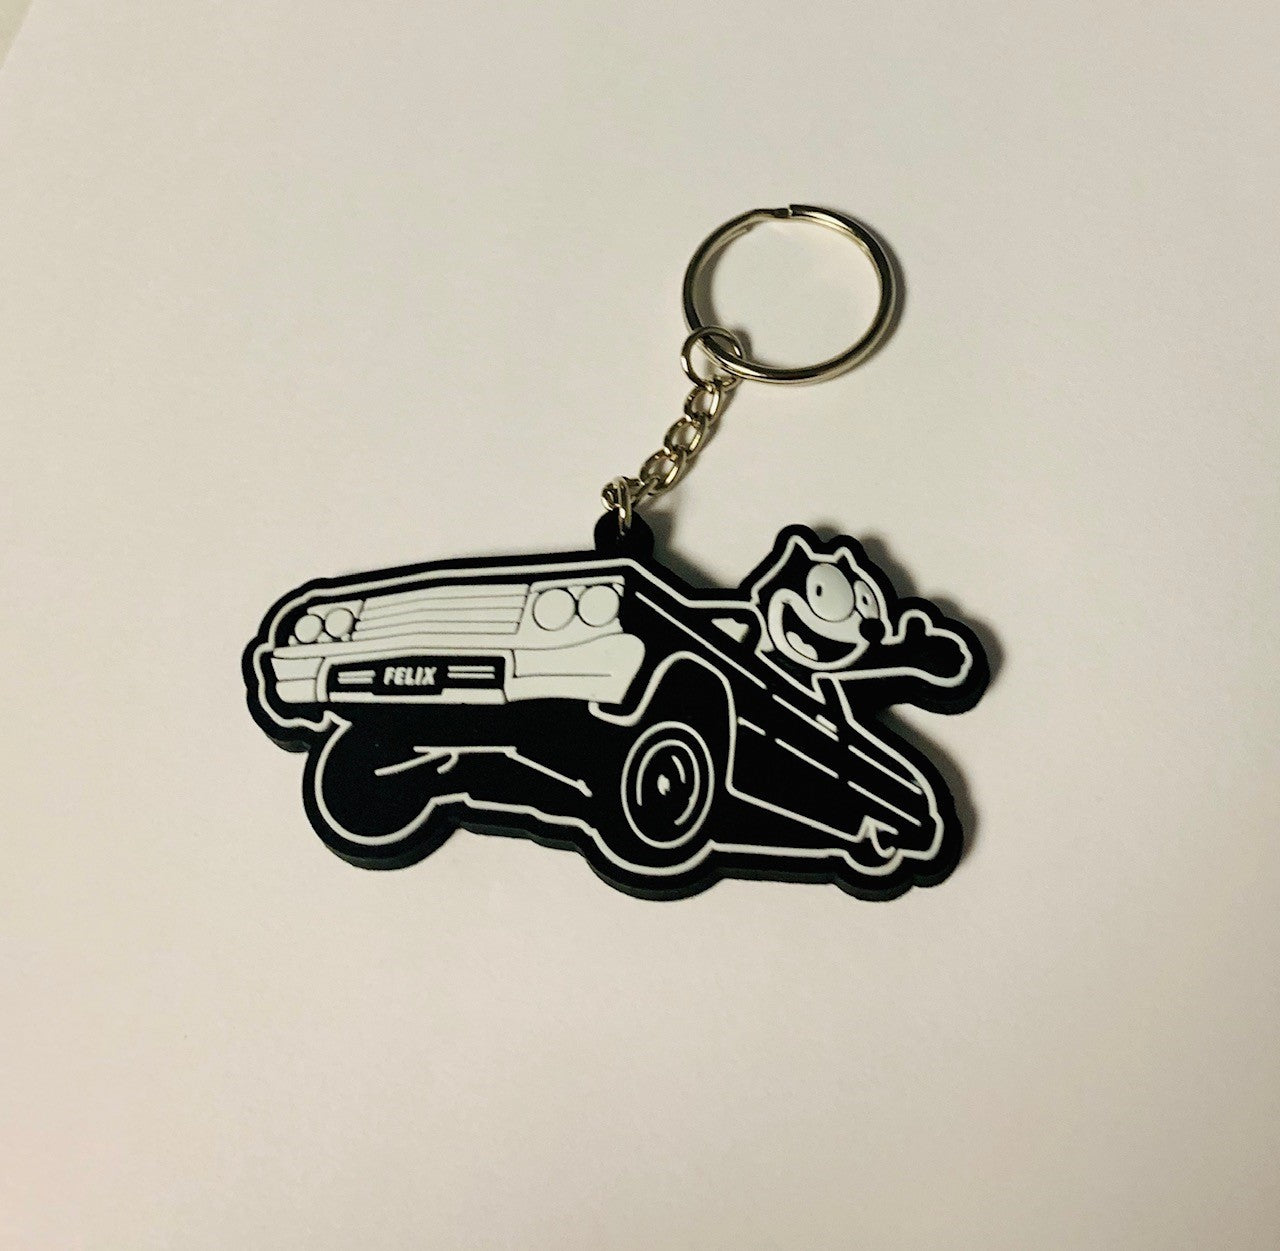 '64 Lowrider Key Chain Red, Black, and Blue